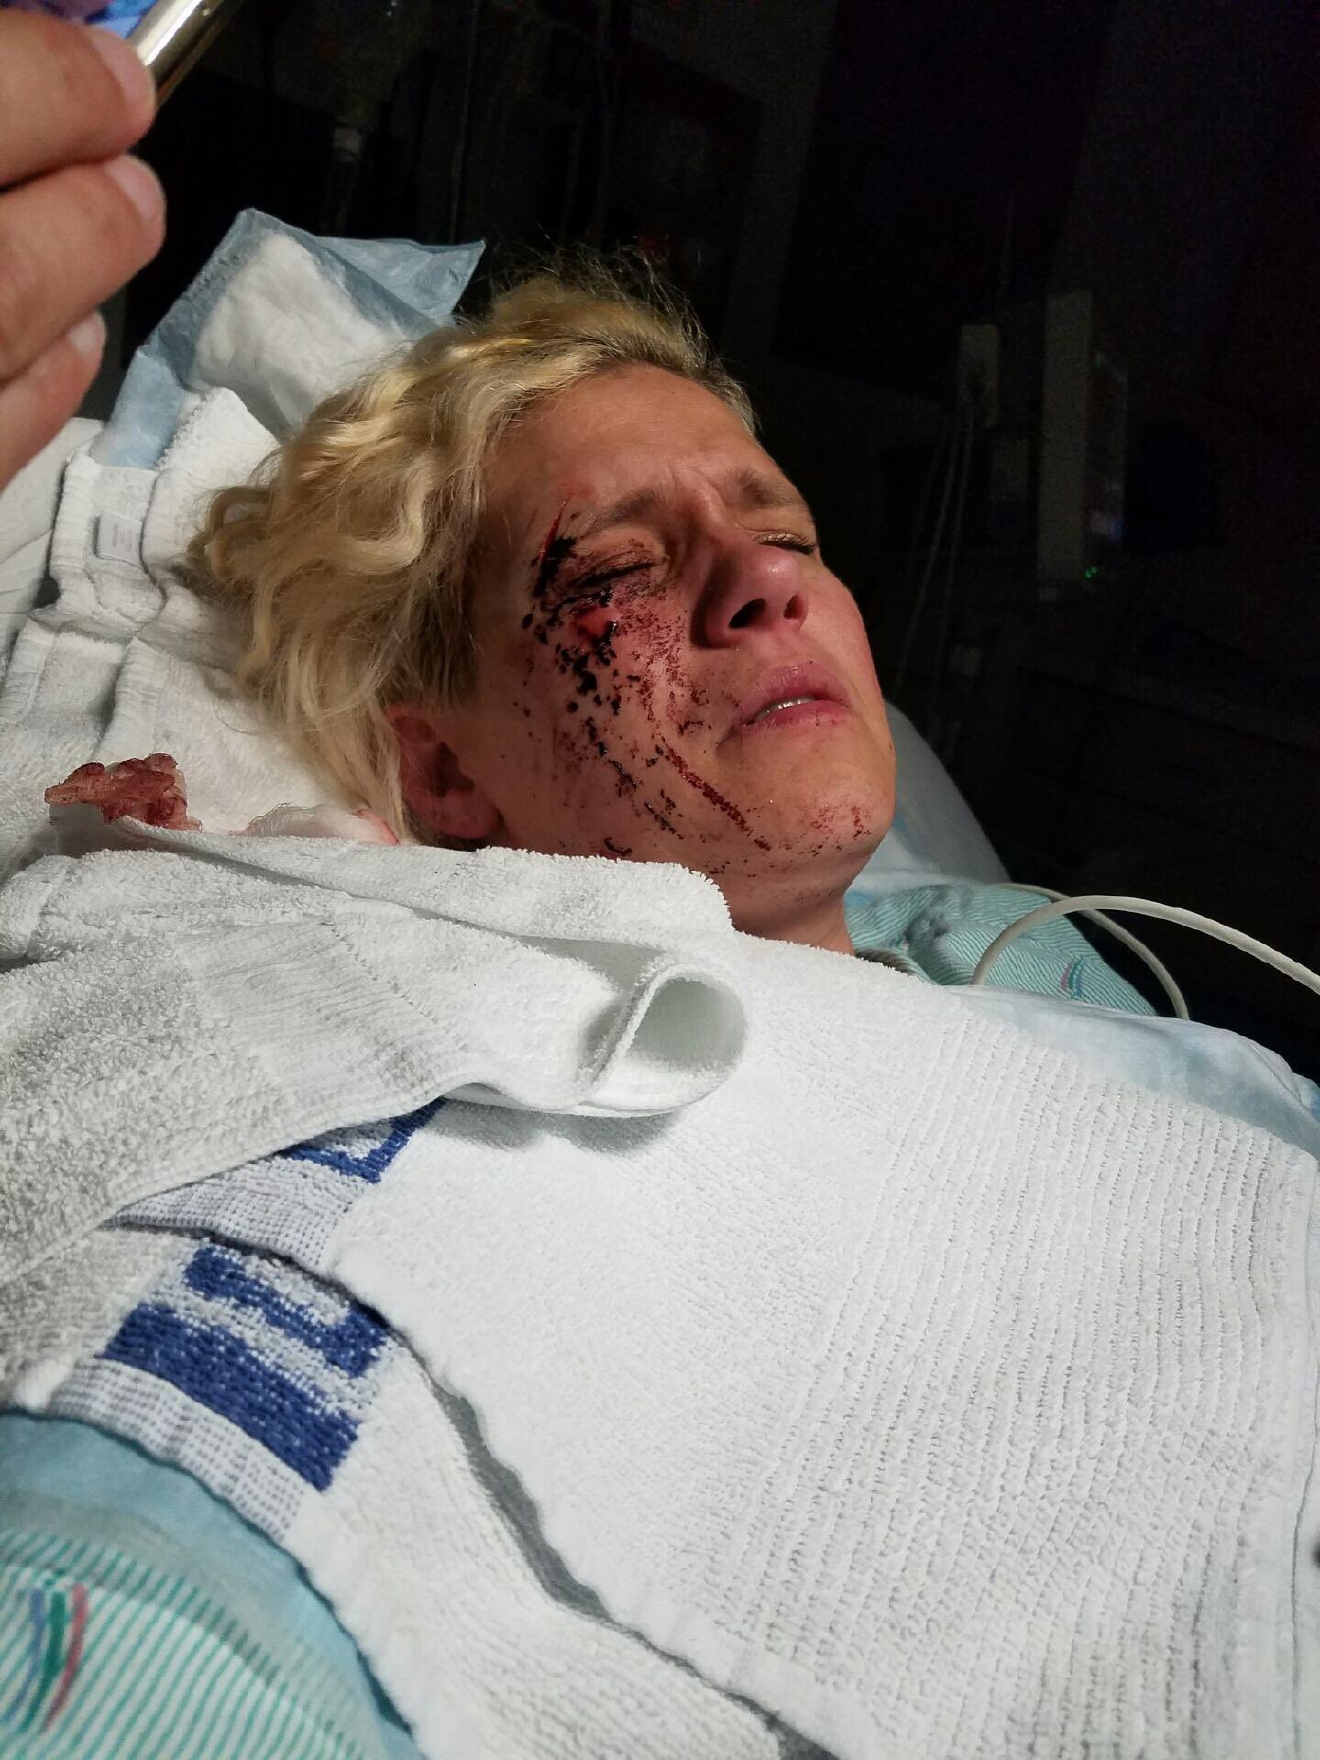 Seattle Pd Fbi Investigating Hate Crime After Transgender Person Attacked On Capitol Hill Komo